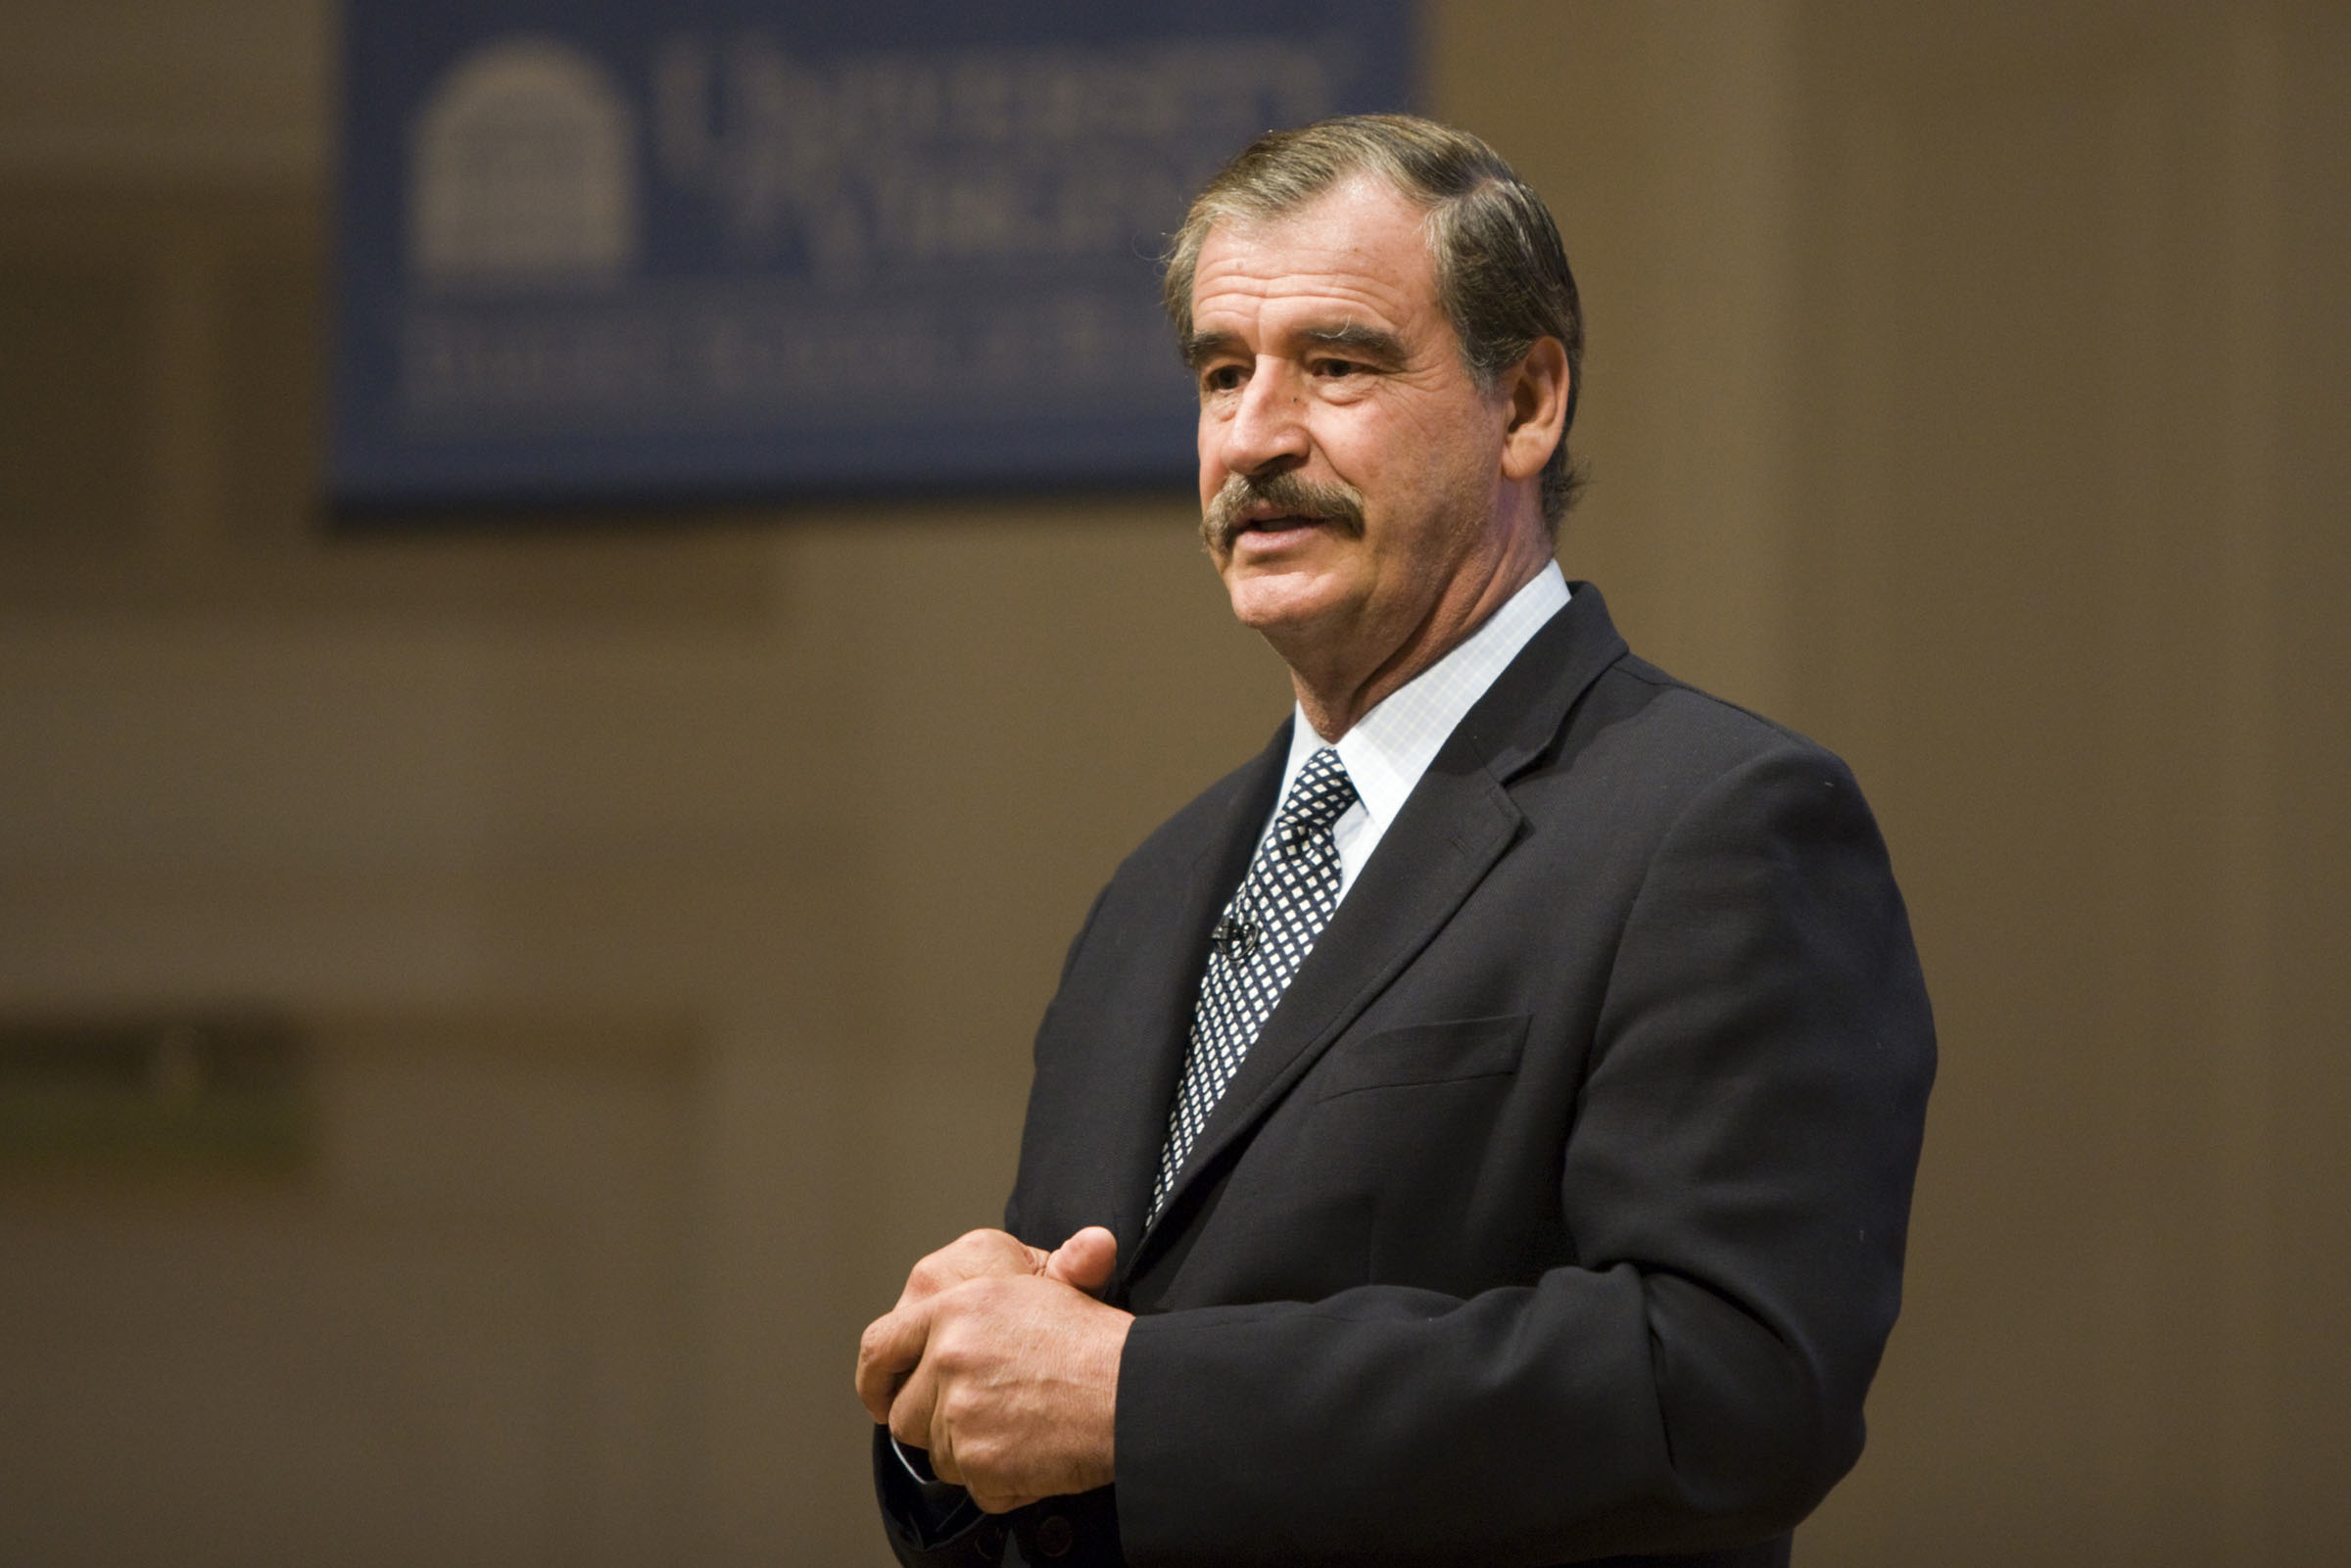 Vicente Fox  speaking from a podium